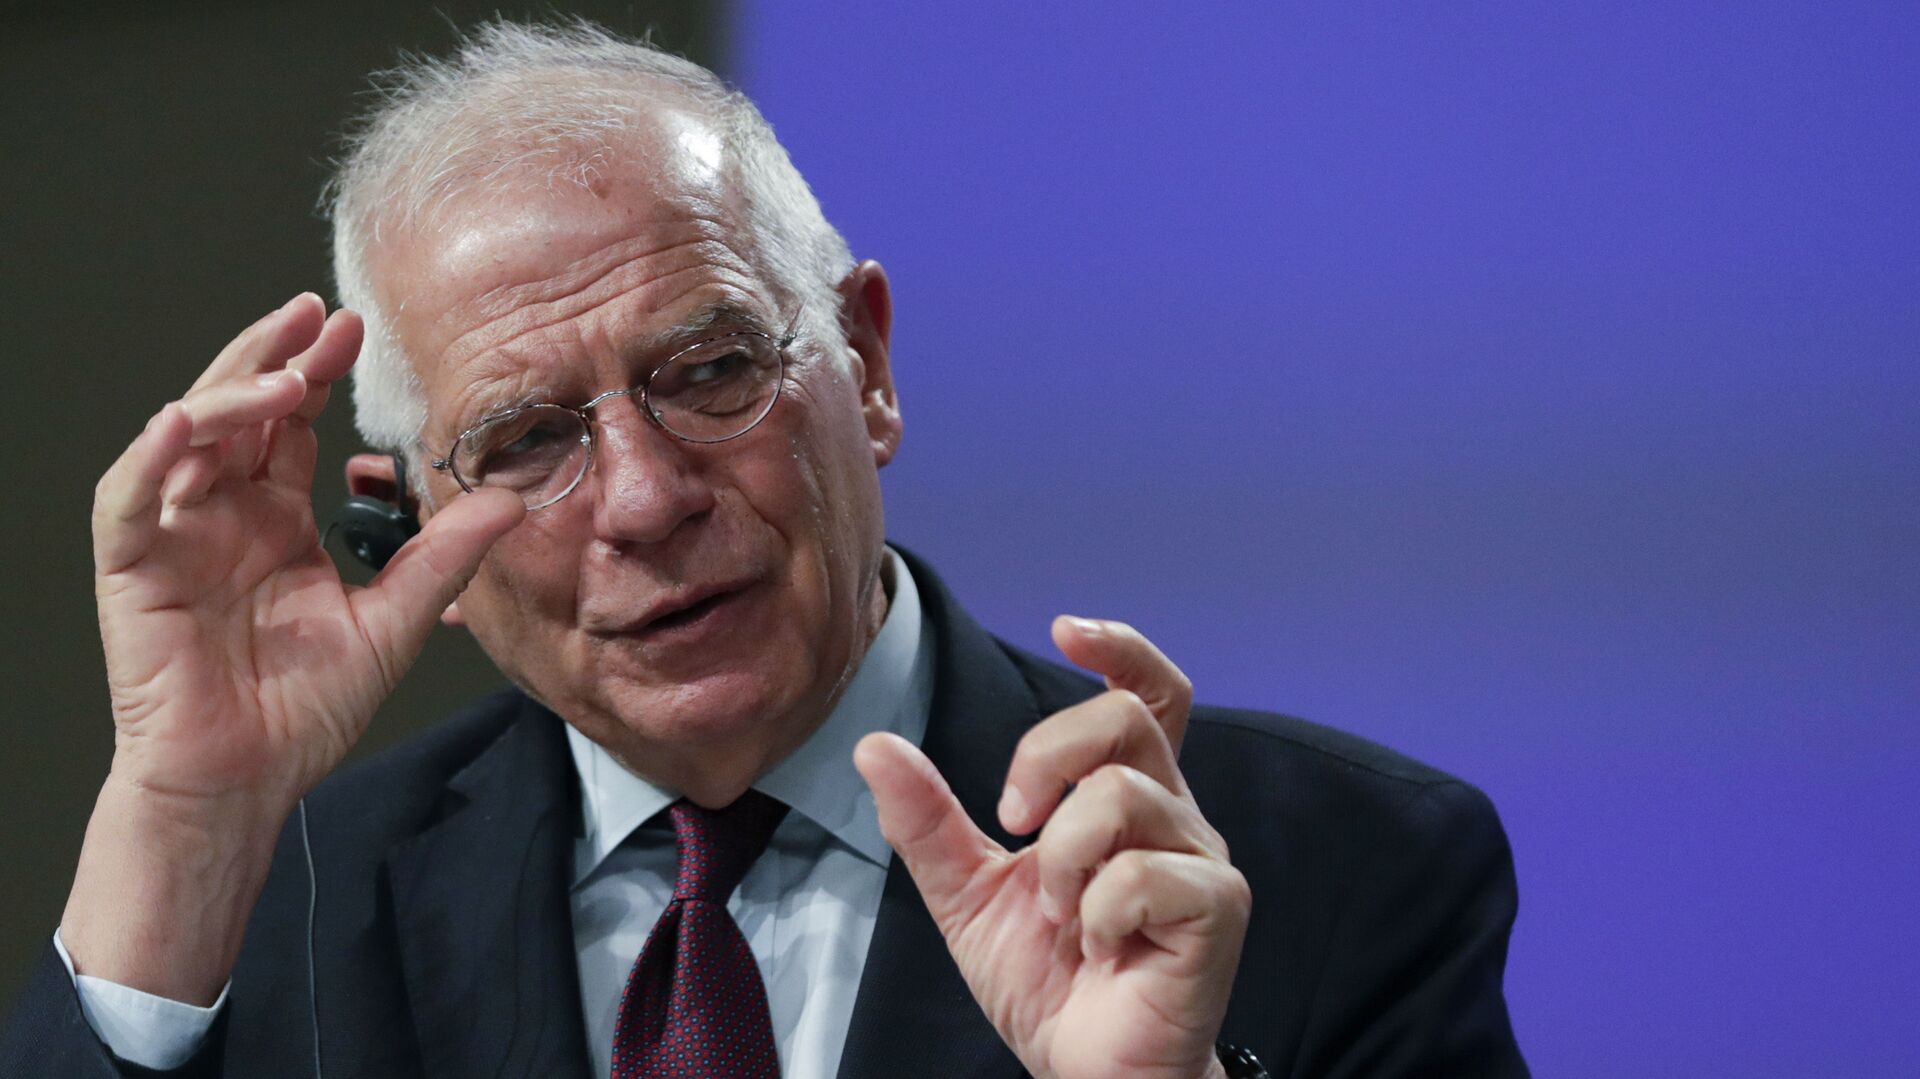 European Union foreign policy chief Josep Borrell addresses a video press conference at EU headquarters in Brussels, Tuesday, June 2, 2020 - Sputnik International, 1920, 09.02.2021